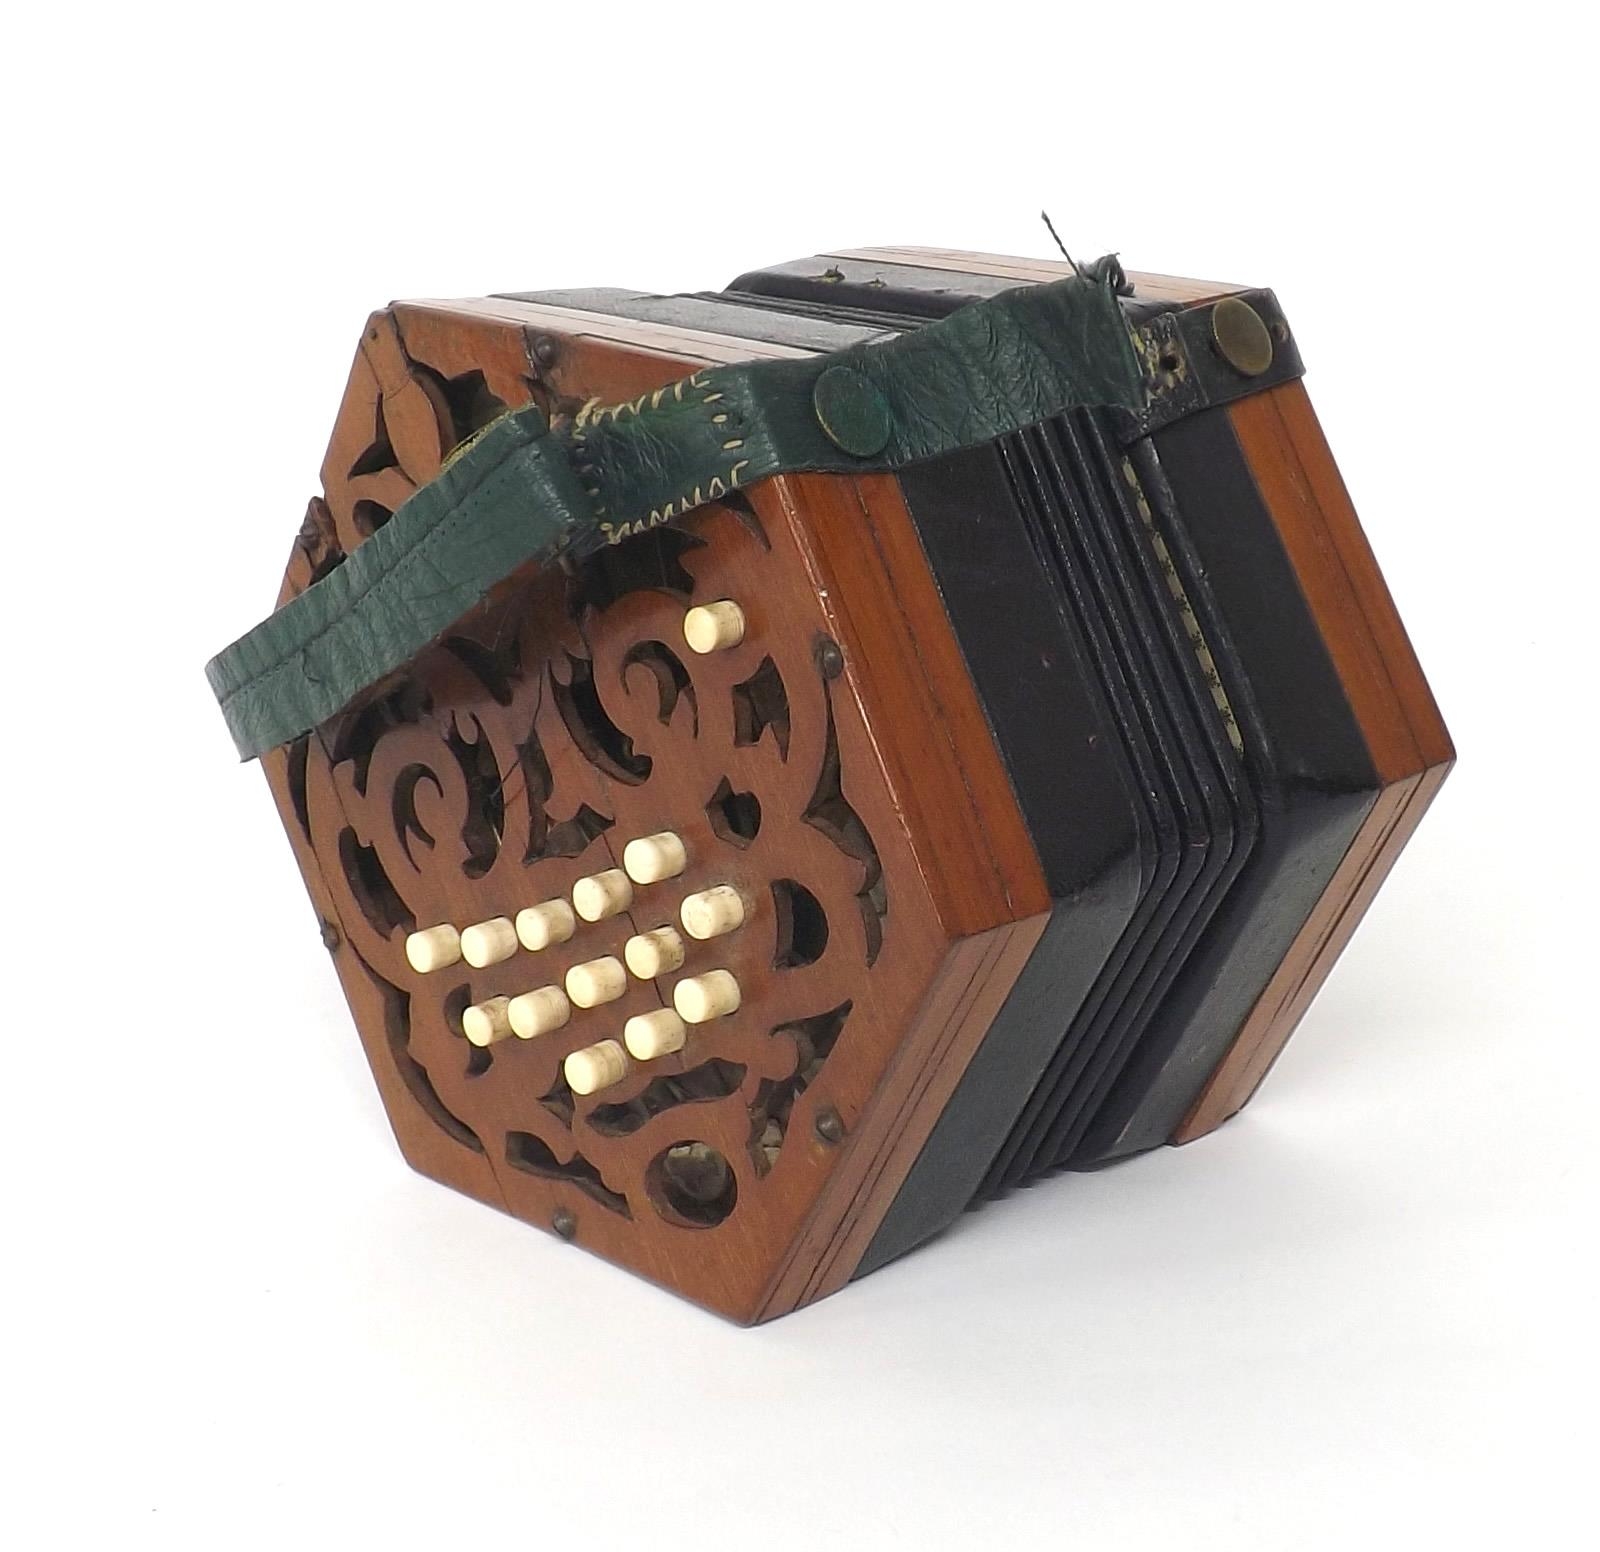 C. Jones concertina in need of restoration, with twenty-seven bone buttons on pierced mahogany ends,